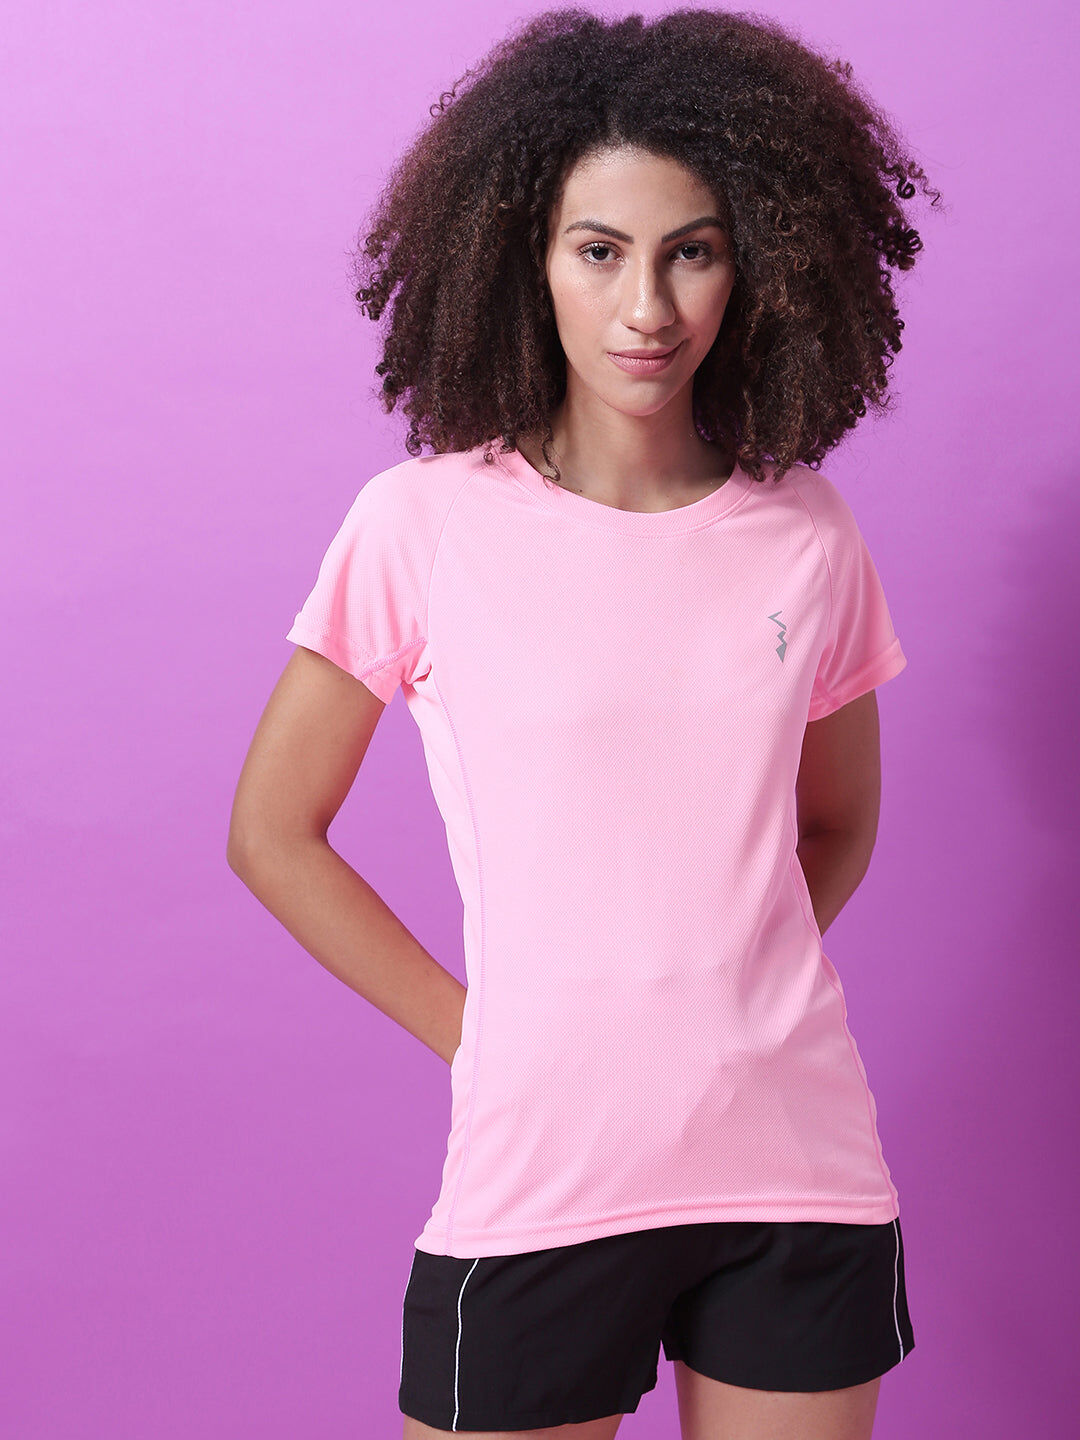 Campus Sutra Solid Women Round Neck Pink Sports Jersey T-Shirt Small female